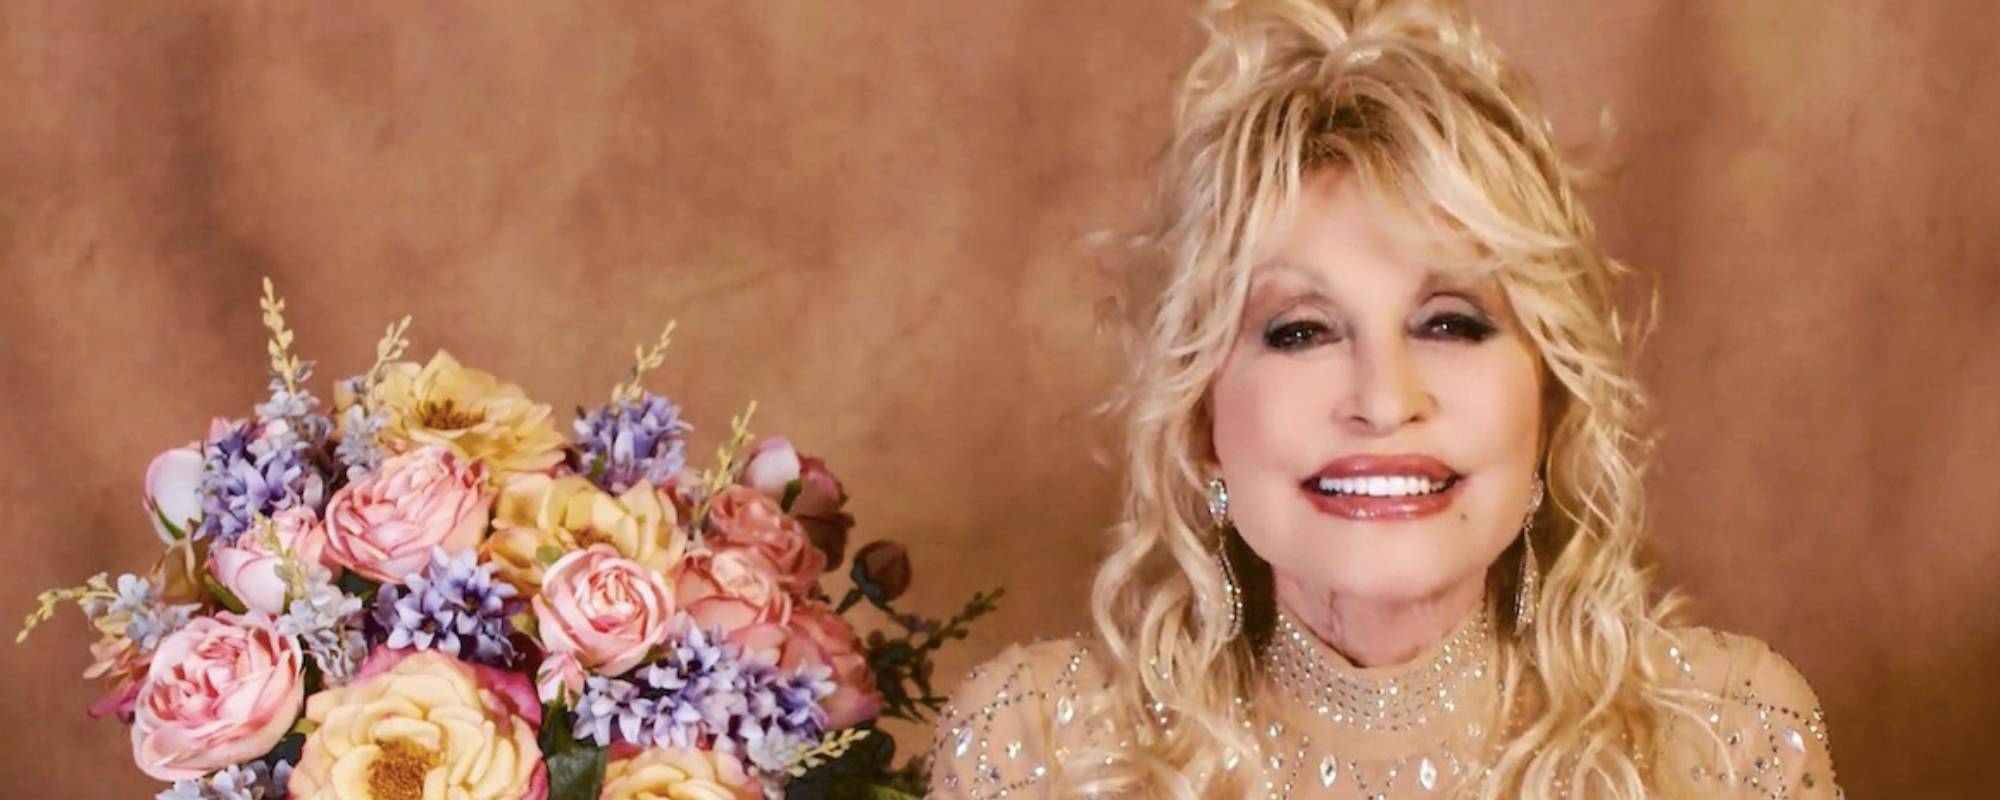 WWDD?: Four Life Lessons To Make You More Like Dolly Parton